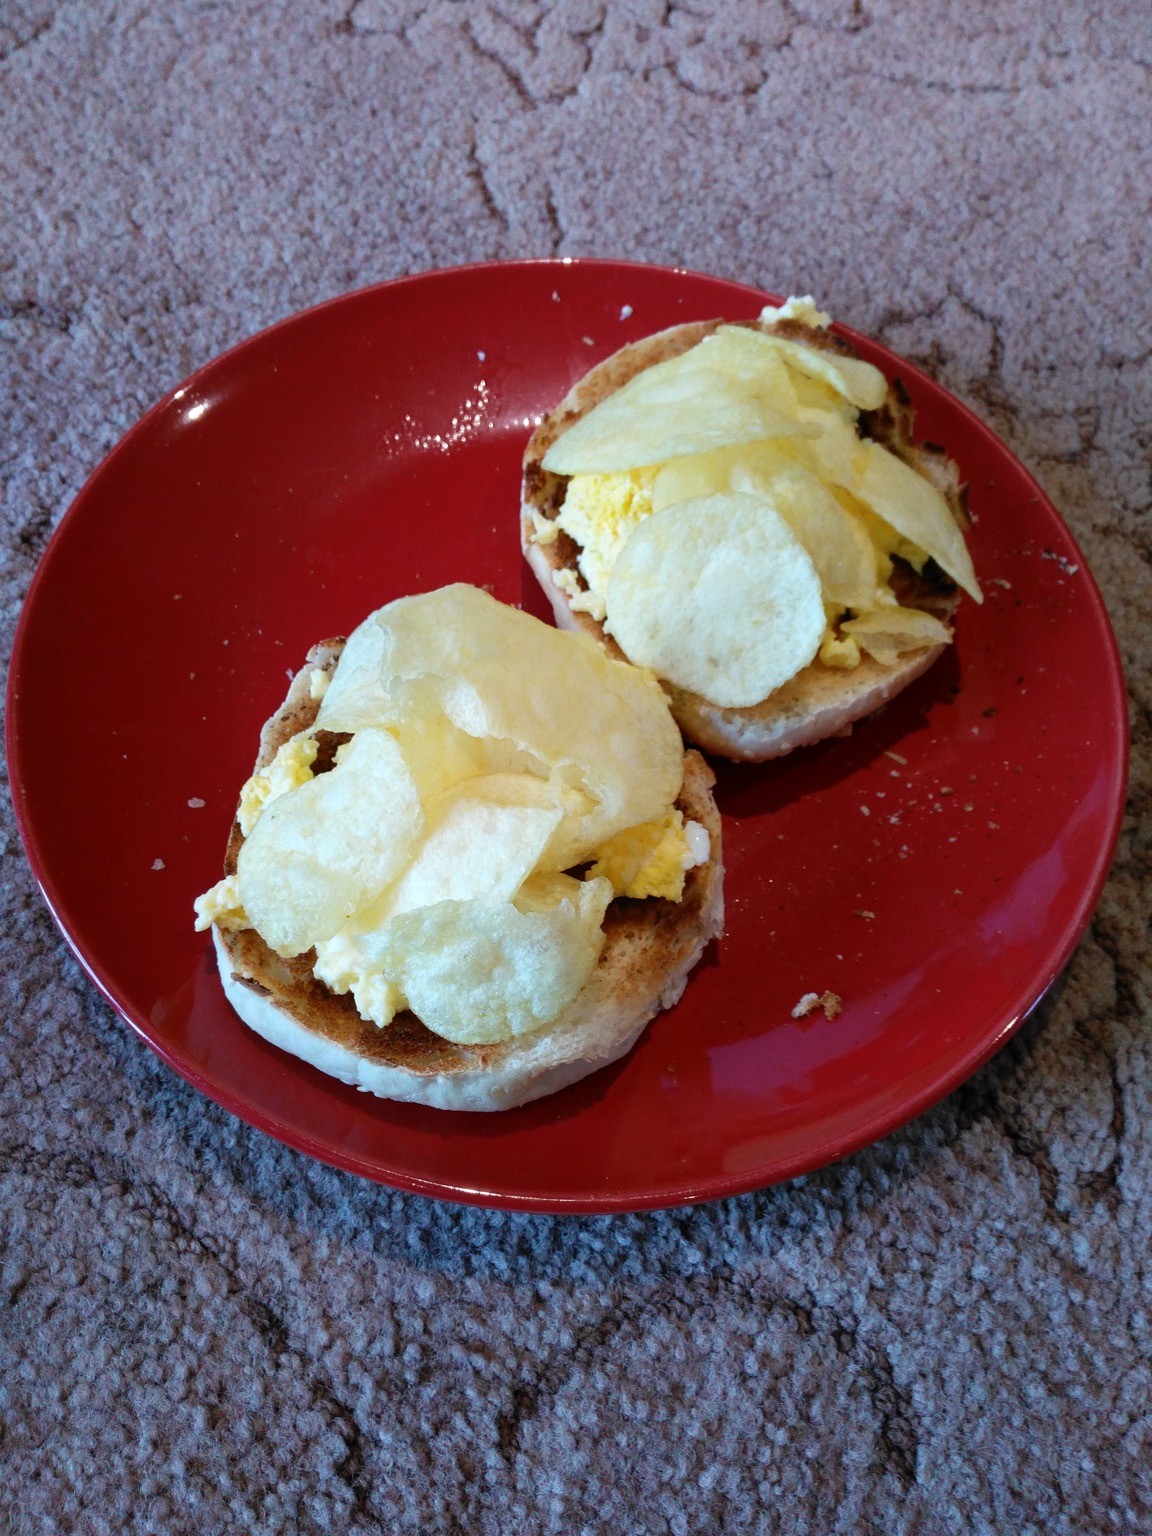 Toasted roll topped with crisps and scrambled egg